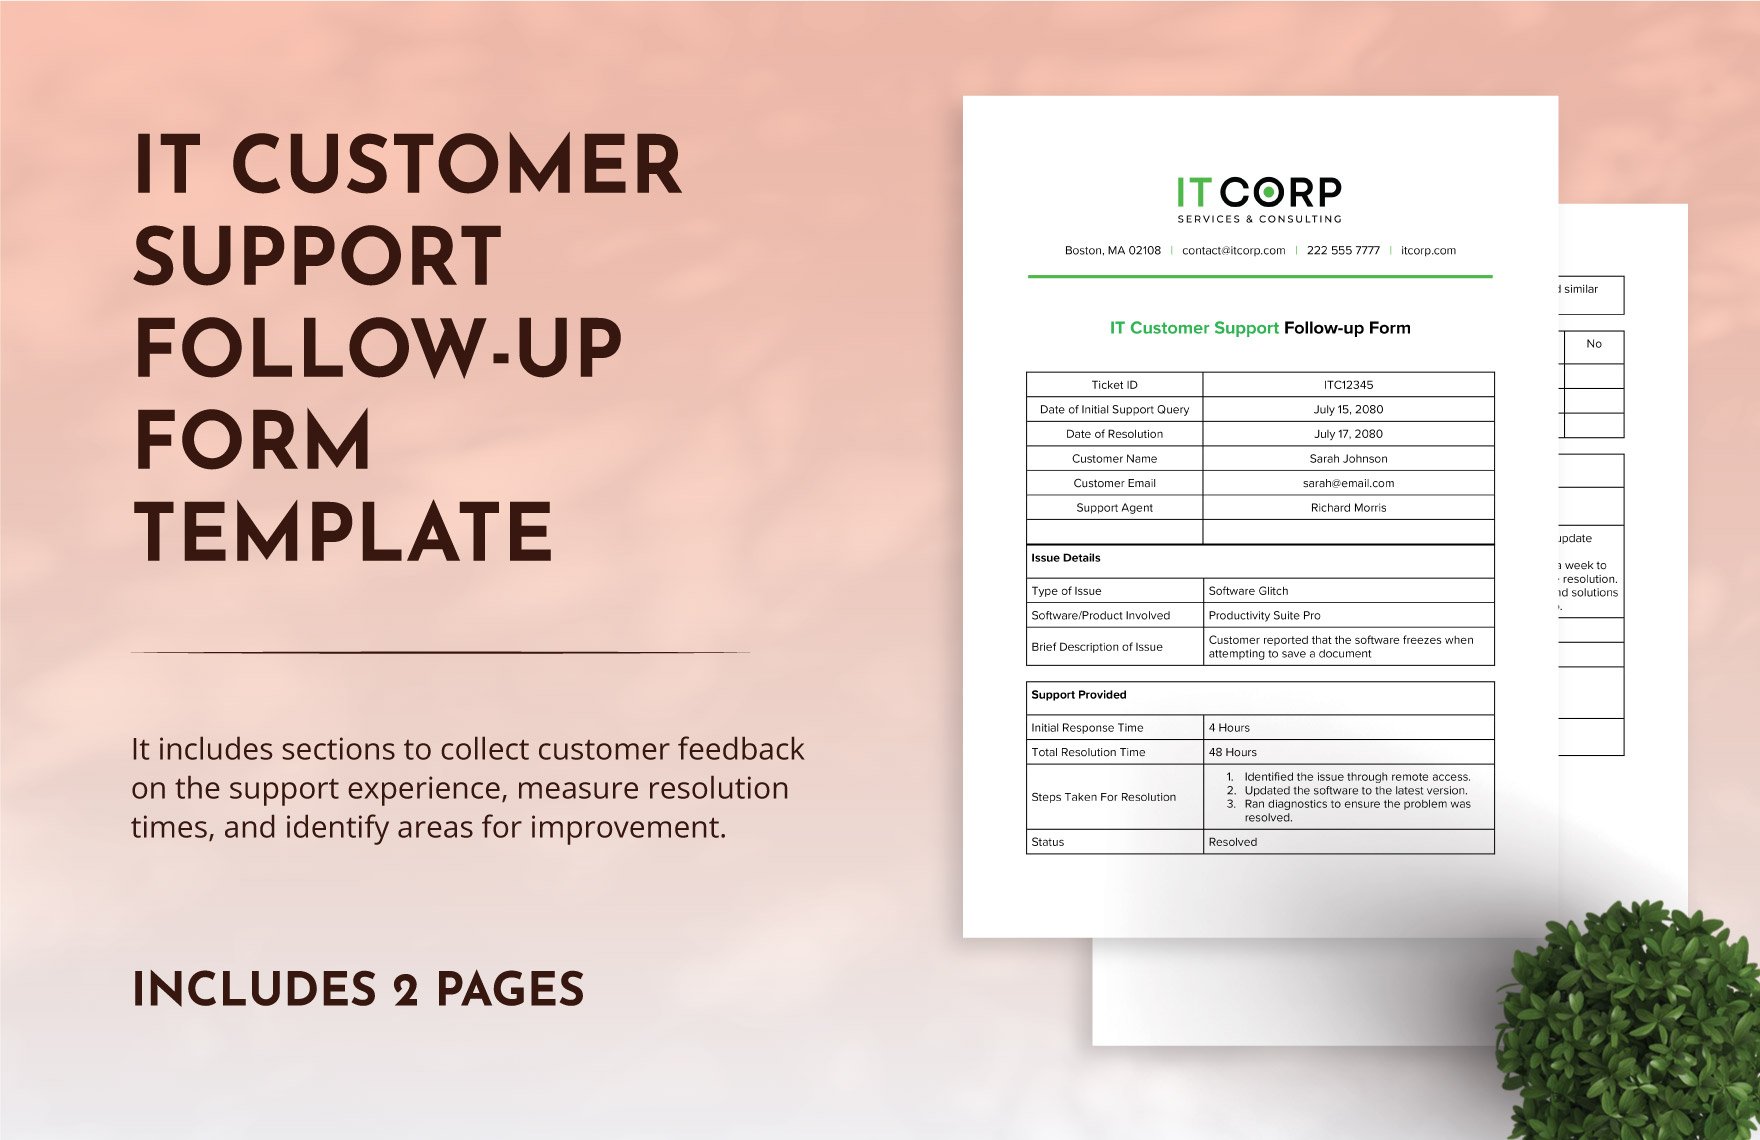 IT Customer Support Follow-up Form Template